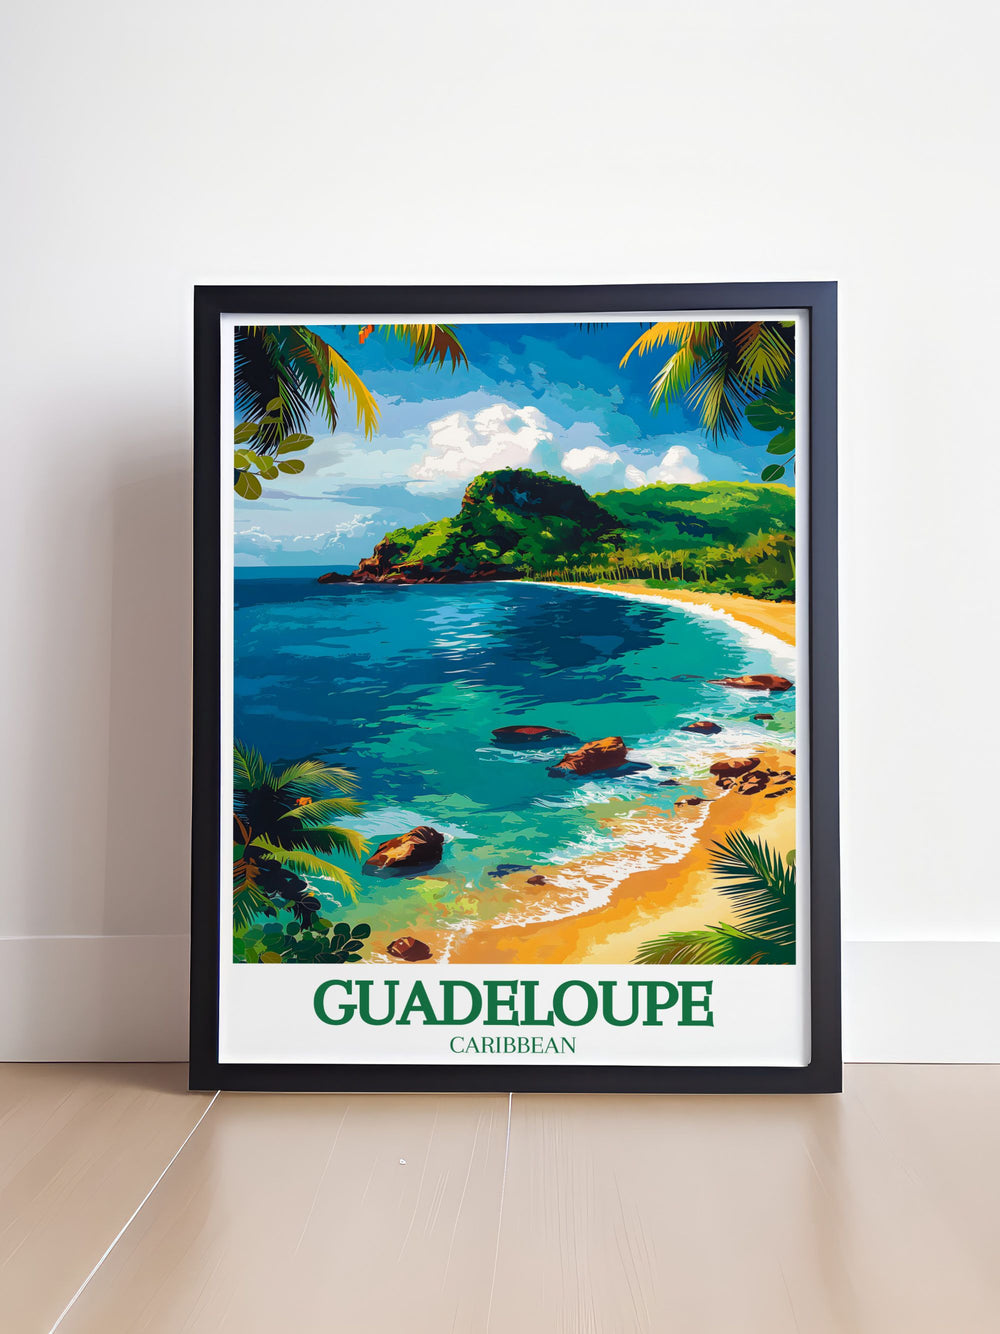 Highlighting the tropical allure of Guadeloupe, this travel poster features its lush landscapes and vibrant culture. Ideal for travelers and nature enthusiasts, this artwork brings the beauty and charm of the Caribbean islands into your living space.